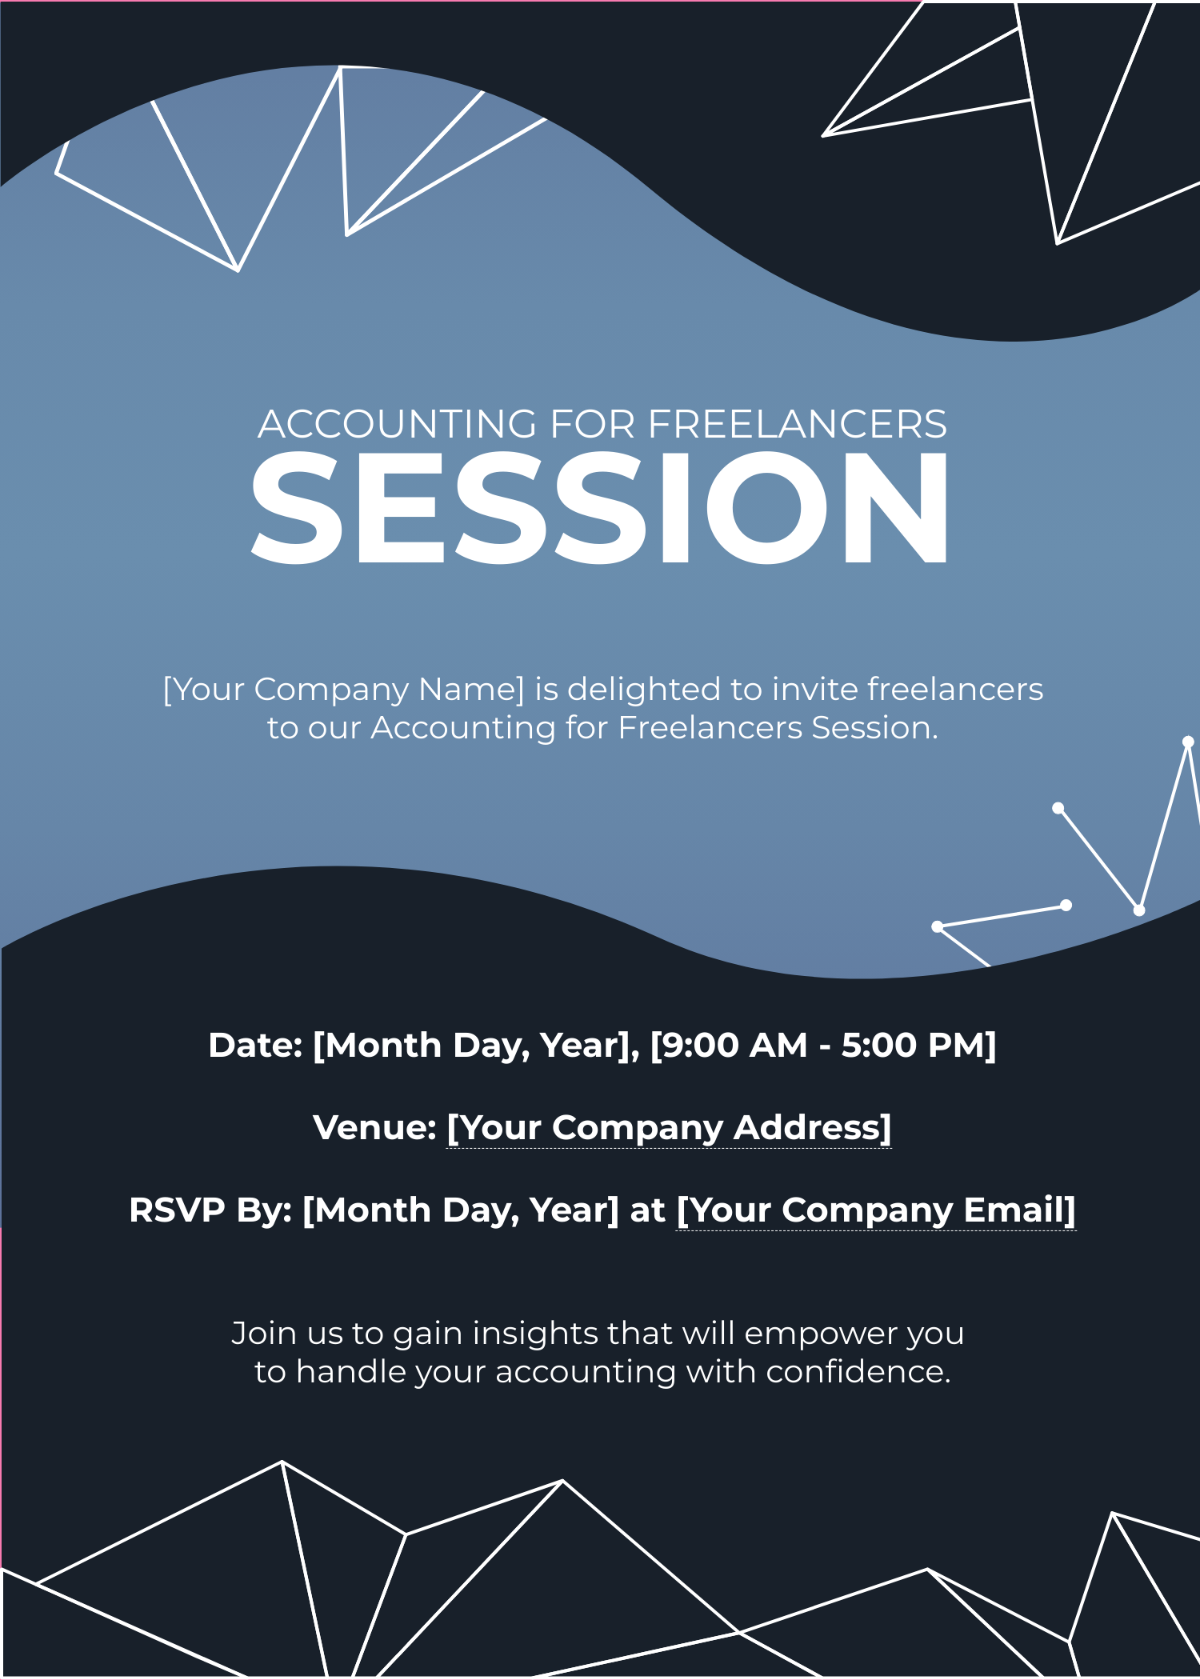 Accounting for Freelancers Session Invitation Card